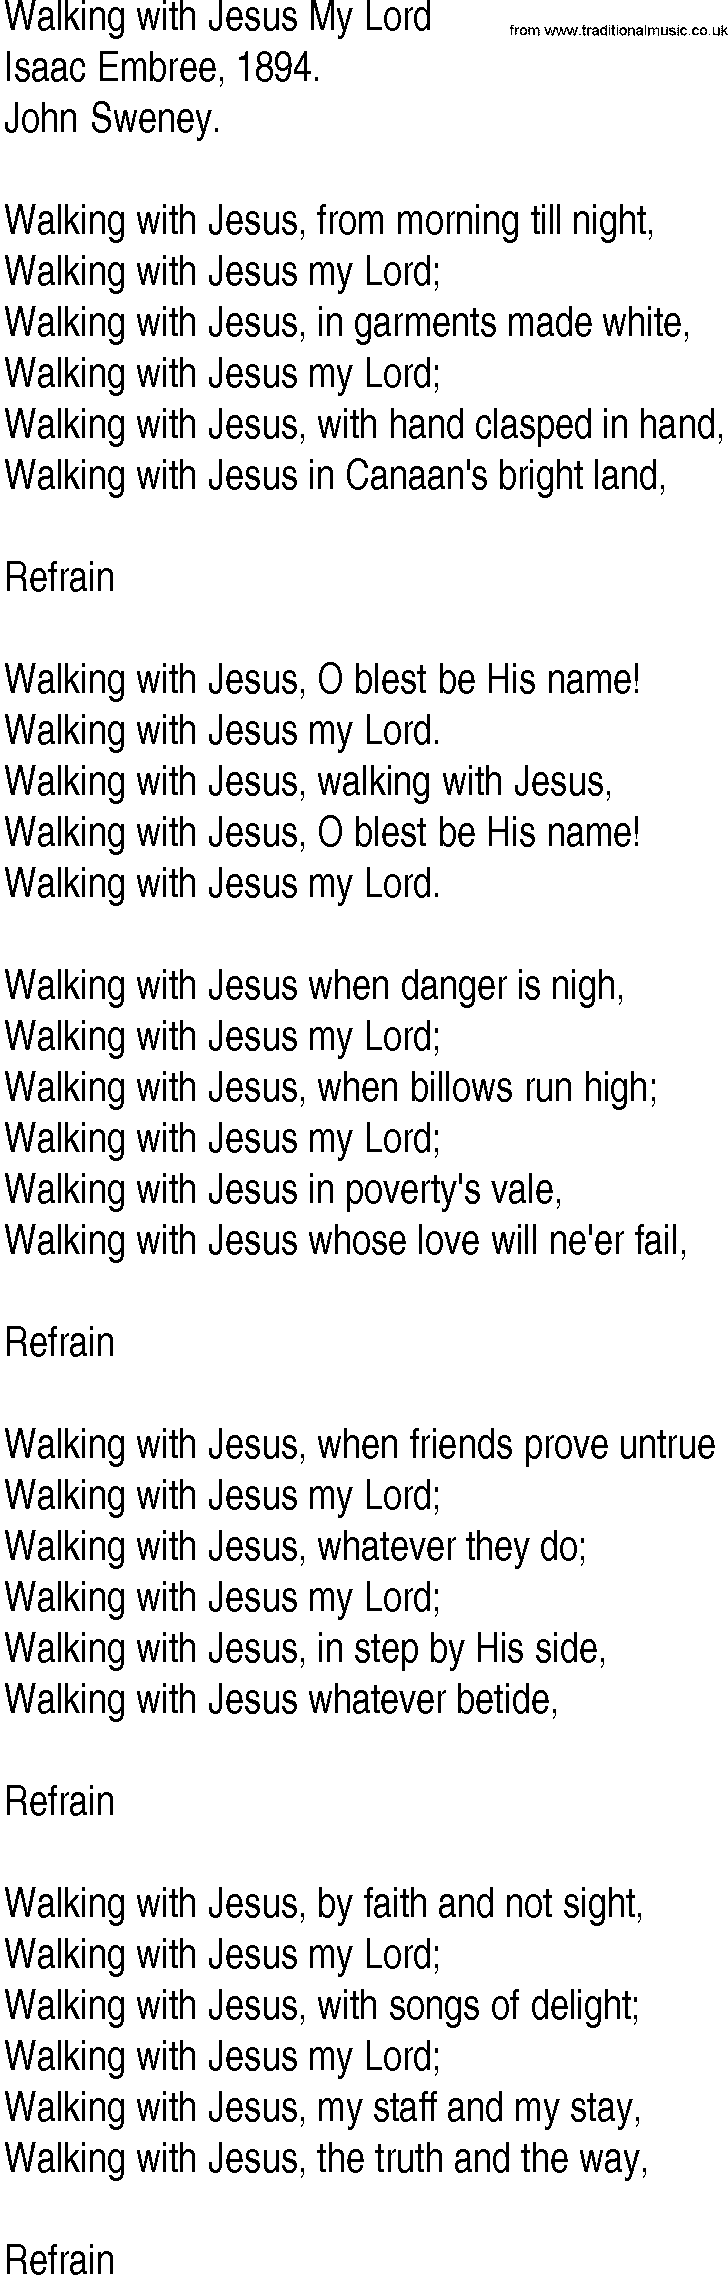 Hymn and Gospel Song: Walking with Jesus My Lord by Isaac Embree lyrics